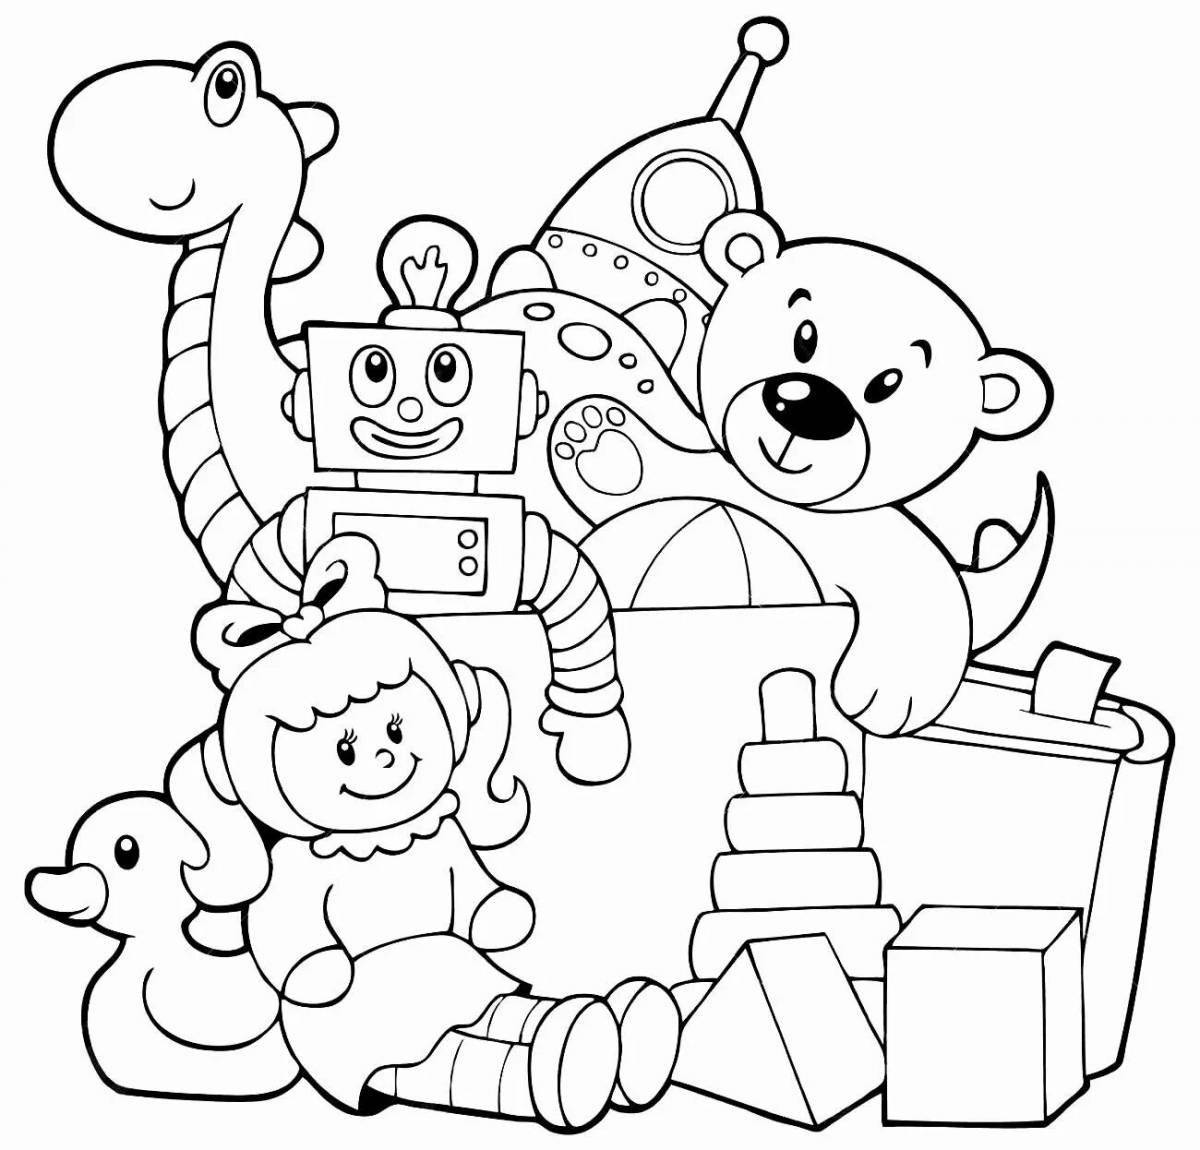 Coloring toy factory filled with joy